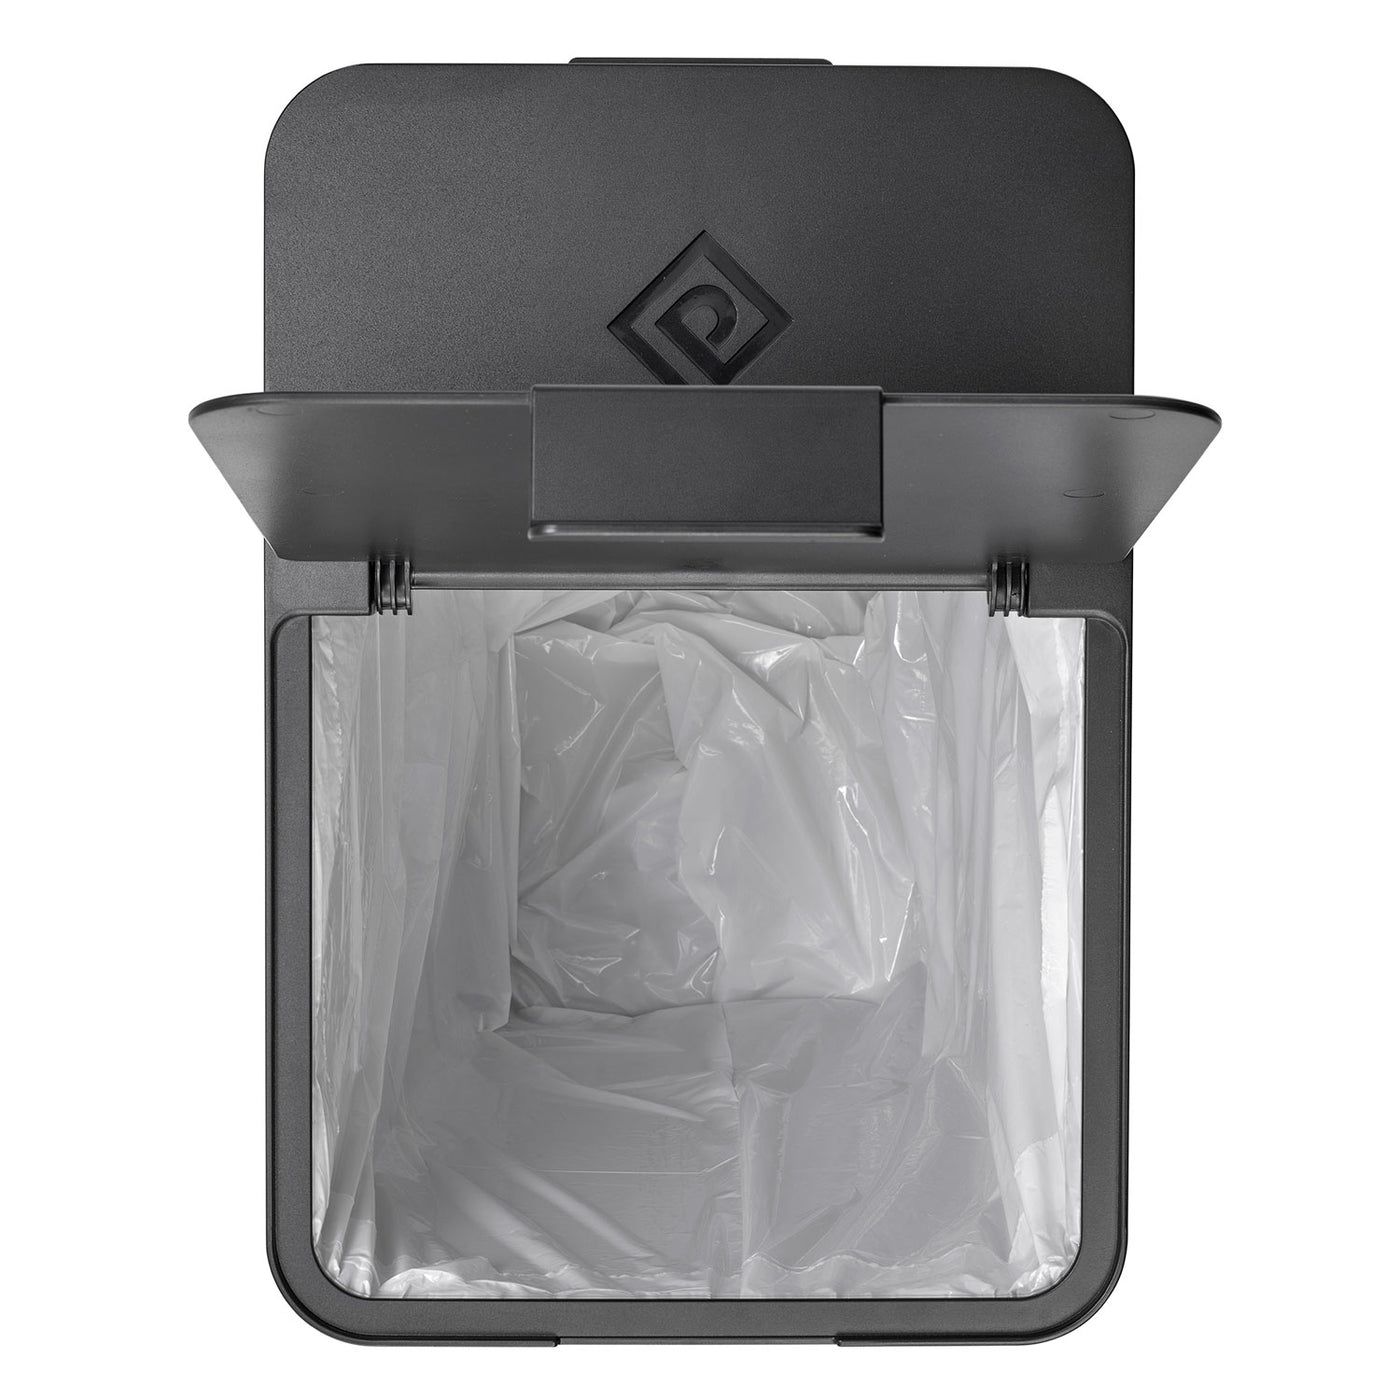 6-Gallon Waste Bin with Removable Lid